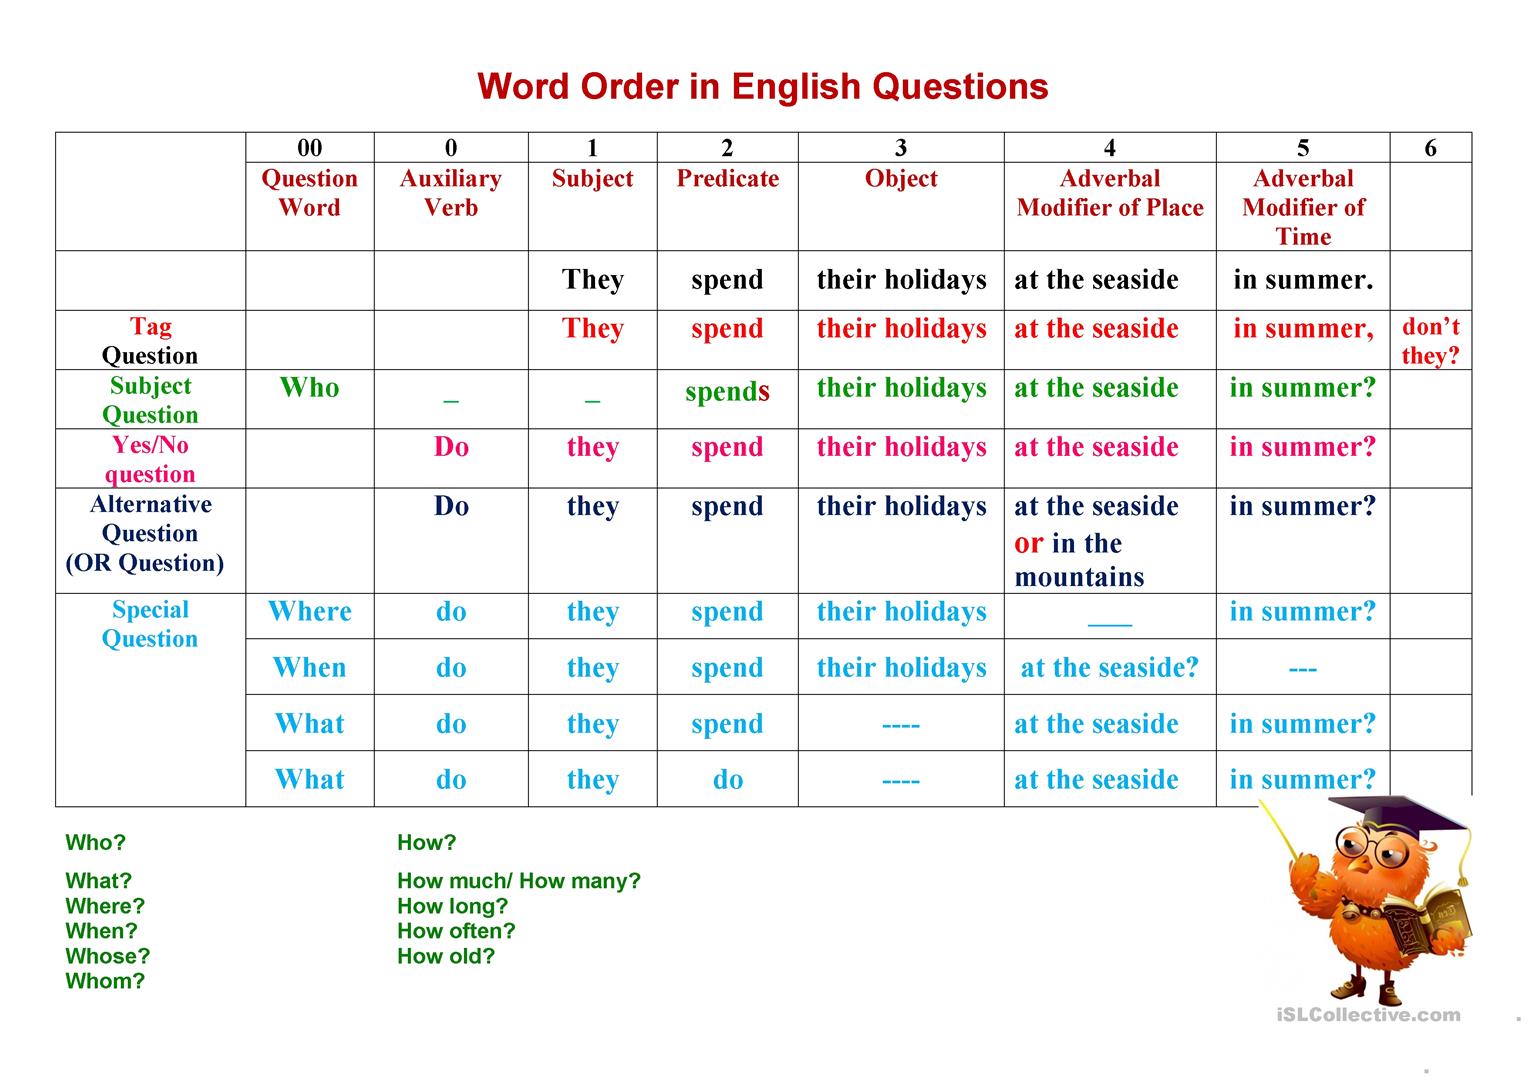 types-of-questions-word-order-in-an-english-questi-grammar-guides